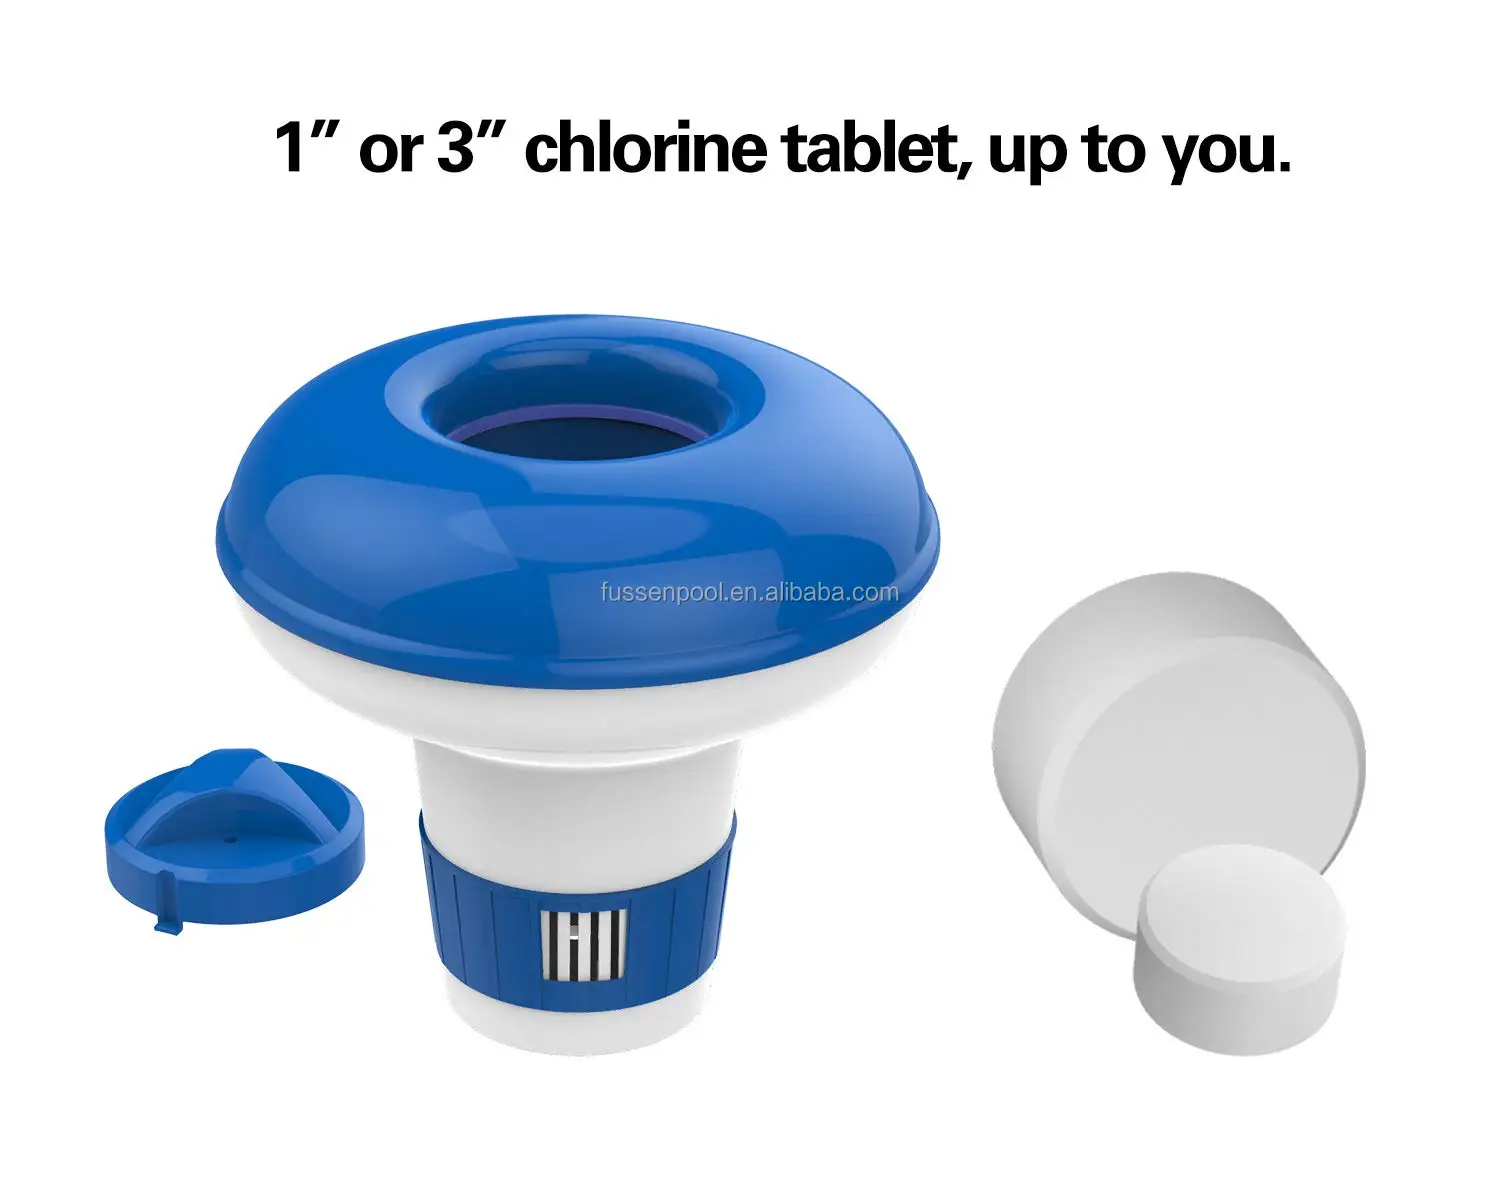 5-inch Floating Chlorine Dispenser, Large Capacity Adjustable Release Tablet Floater for Indoor & Outdoor Swimming Pool SPA